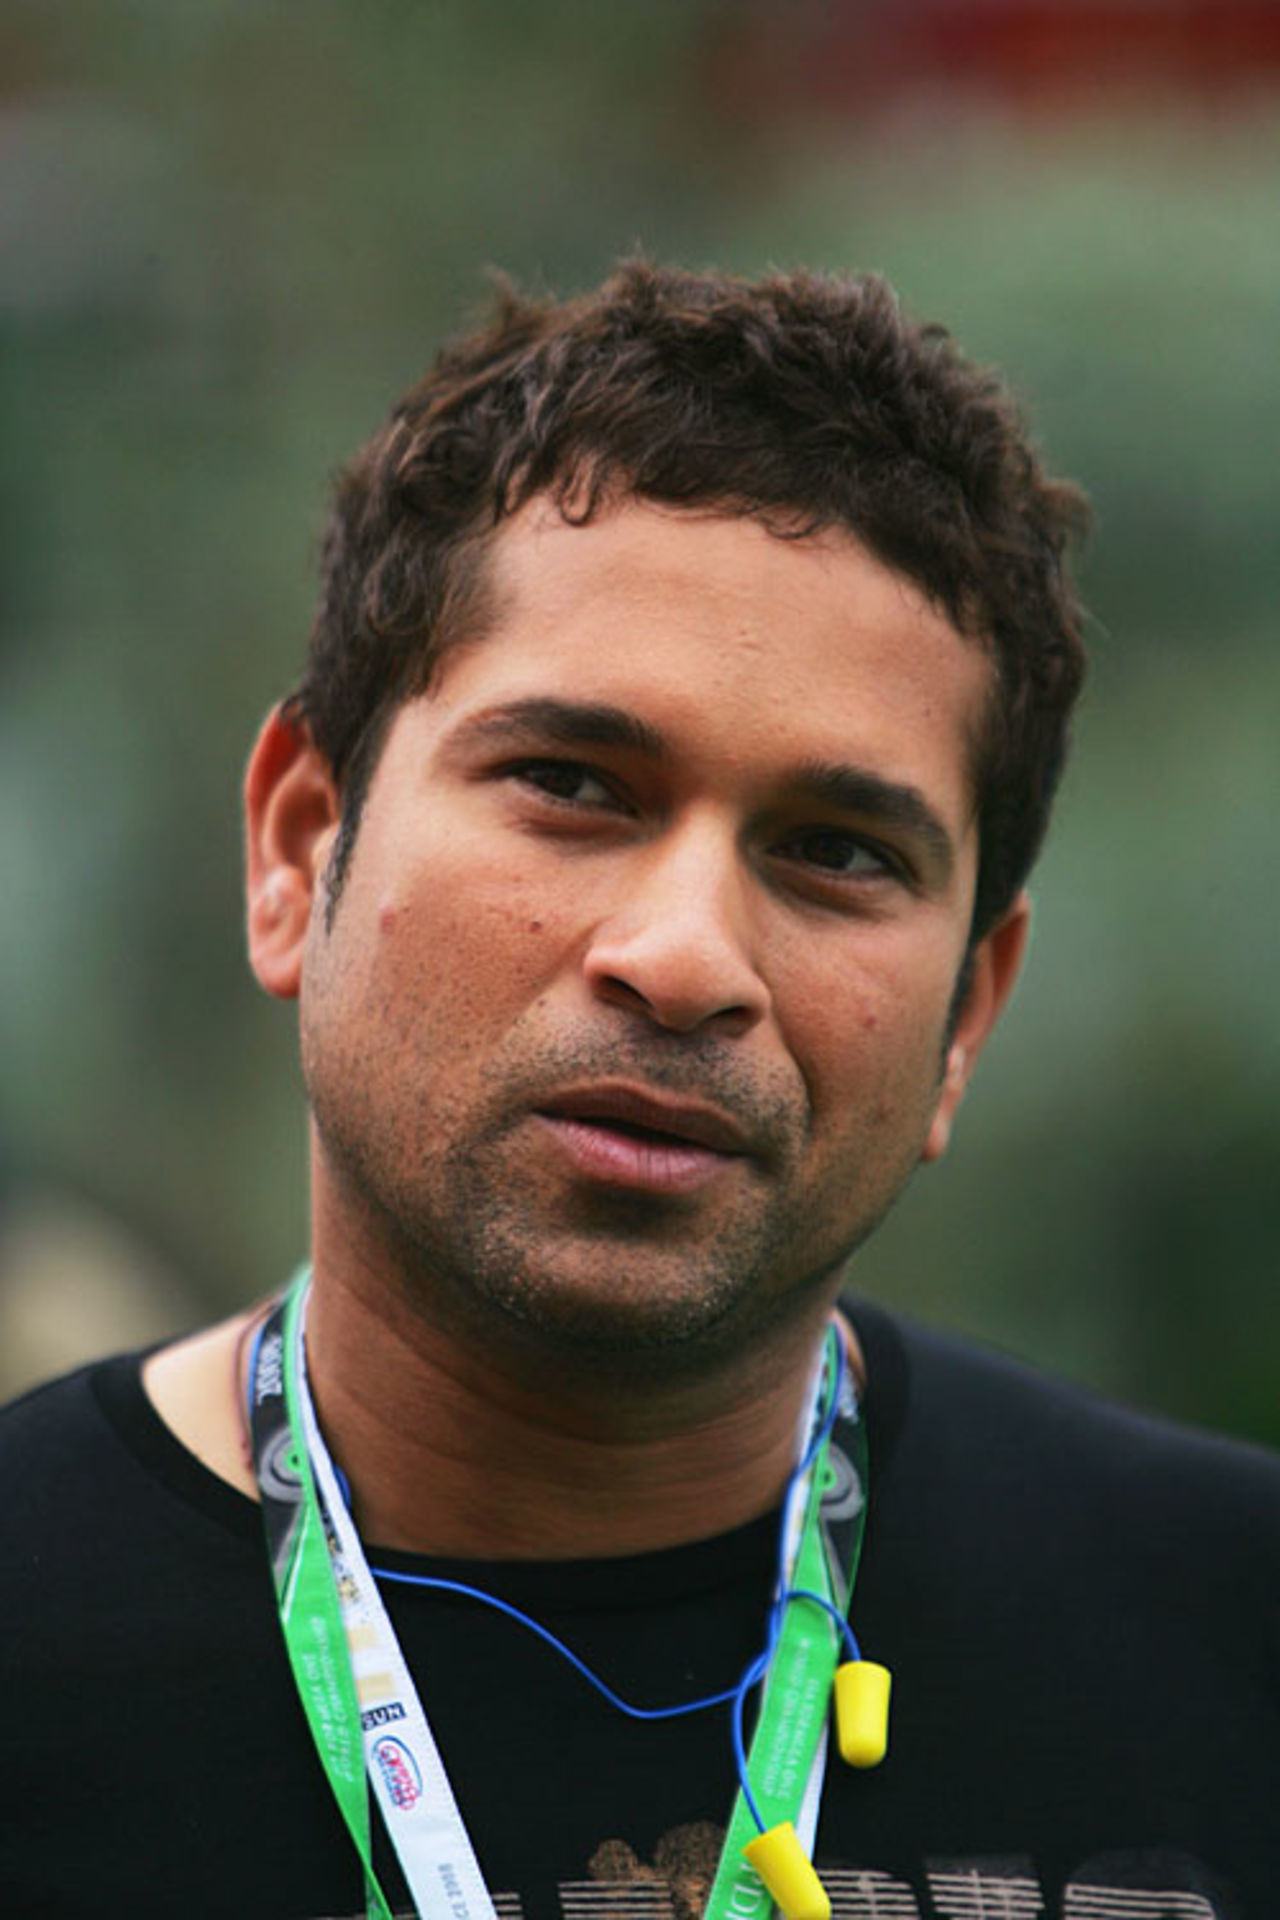 Sachin Tendulkar attends the F1 Grand Prix at Magny-Cours in France, June 22, 2008